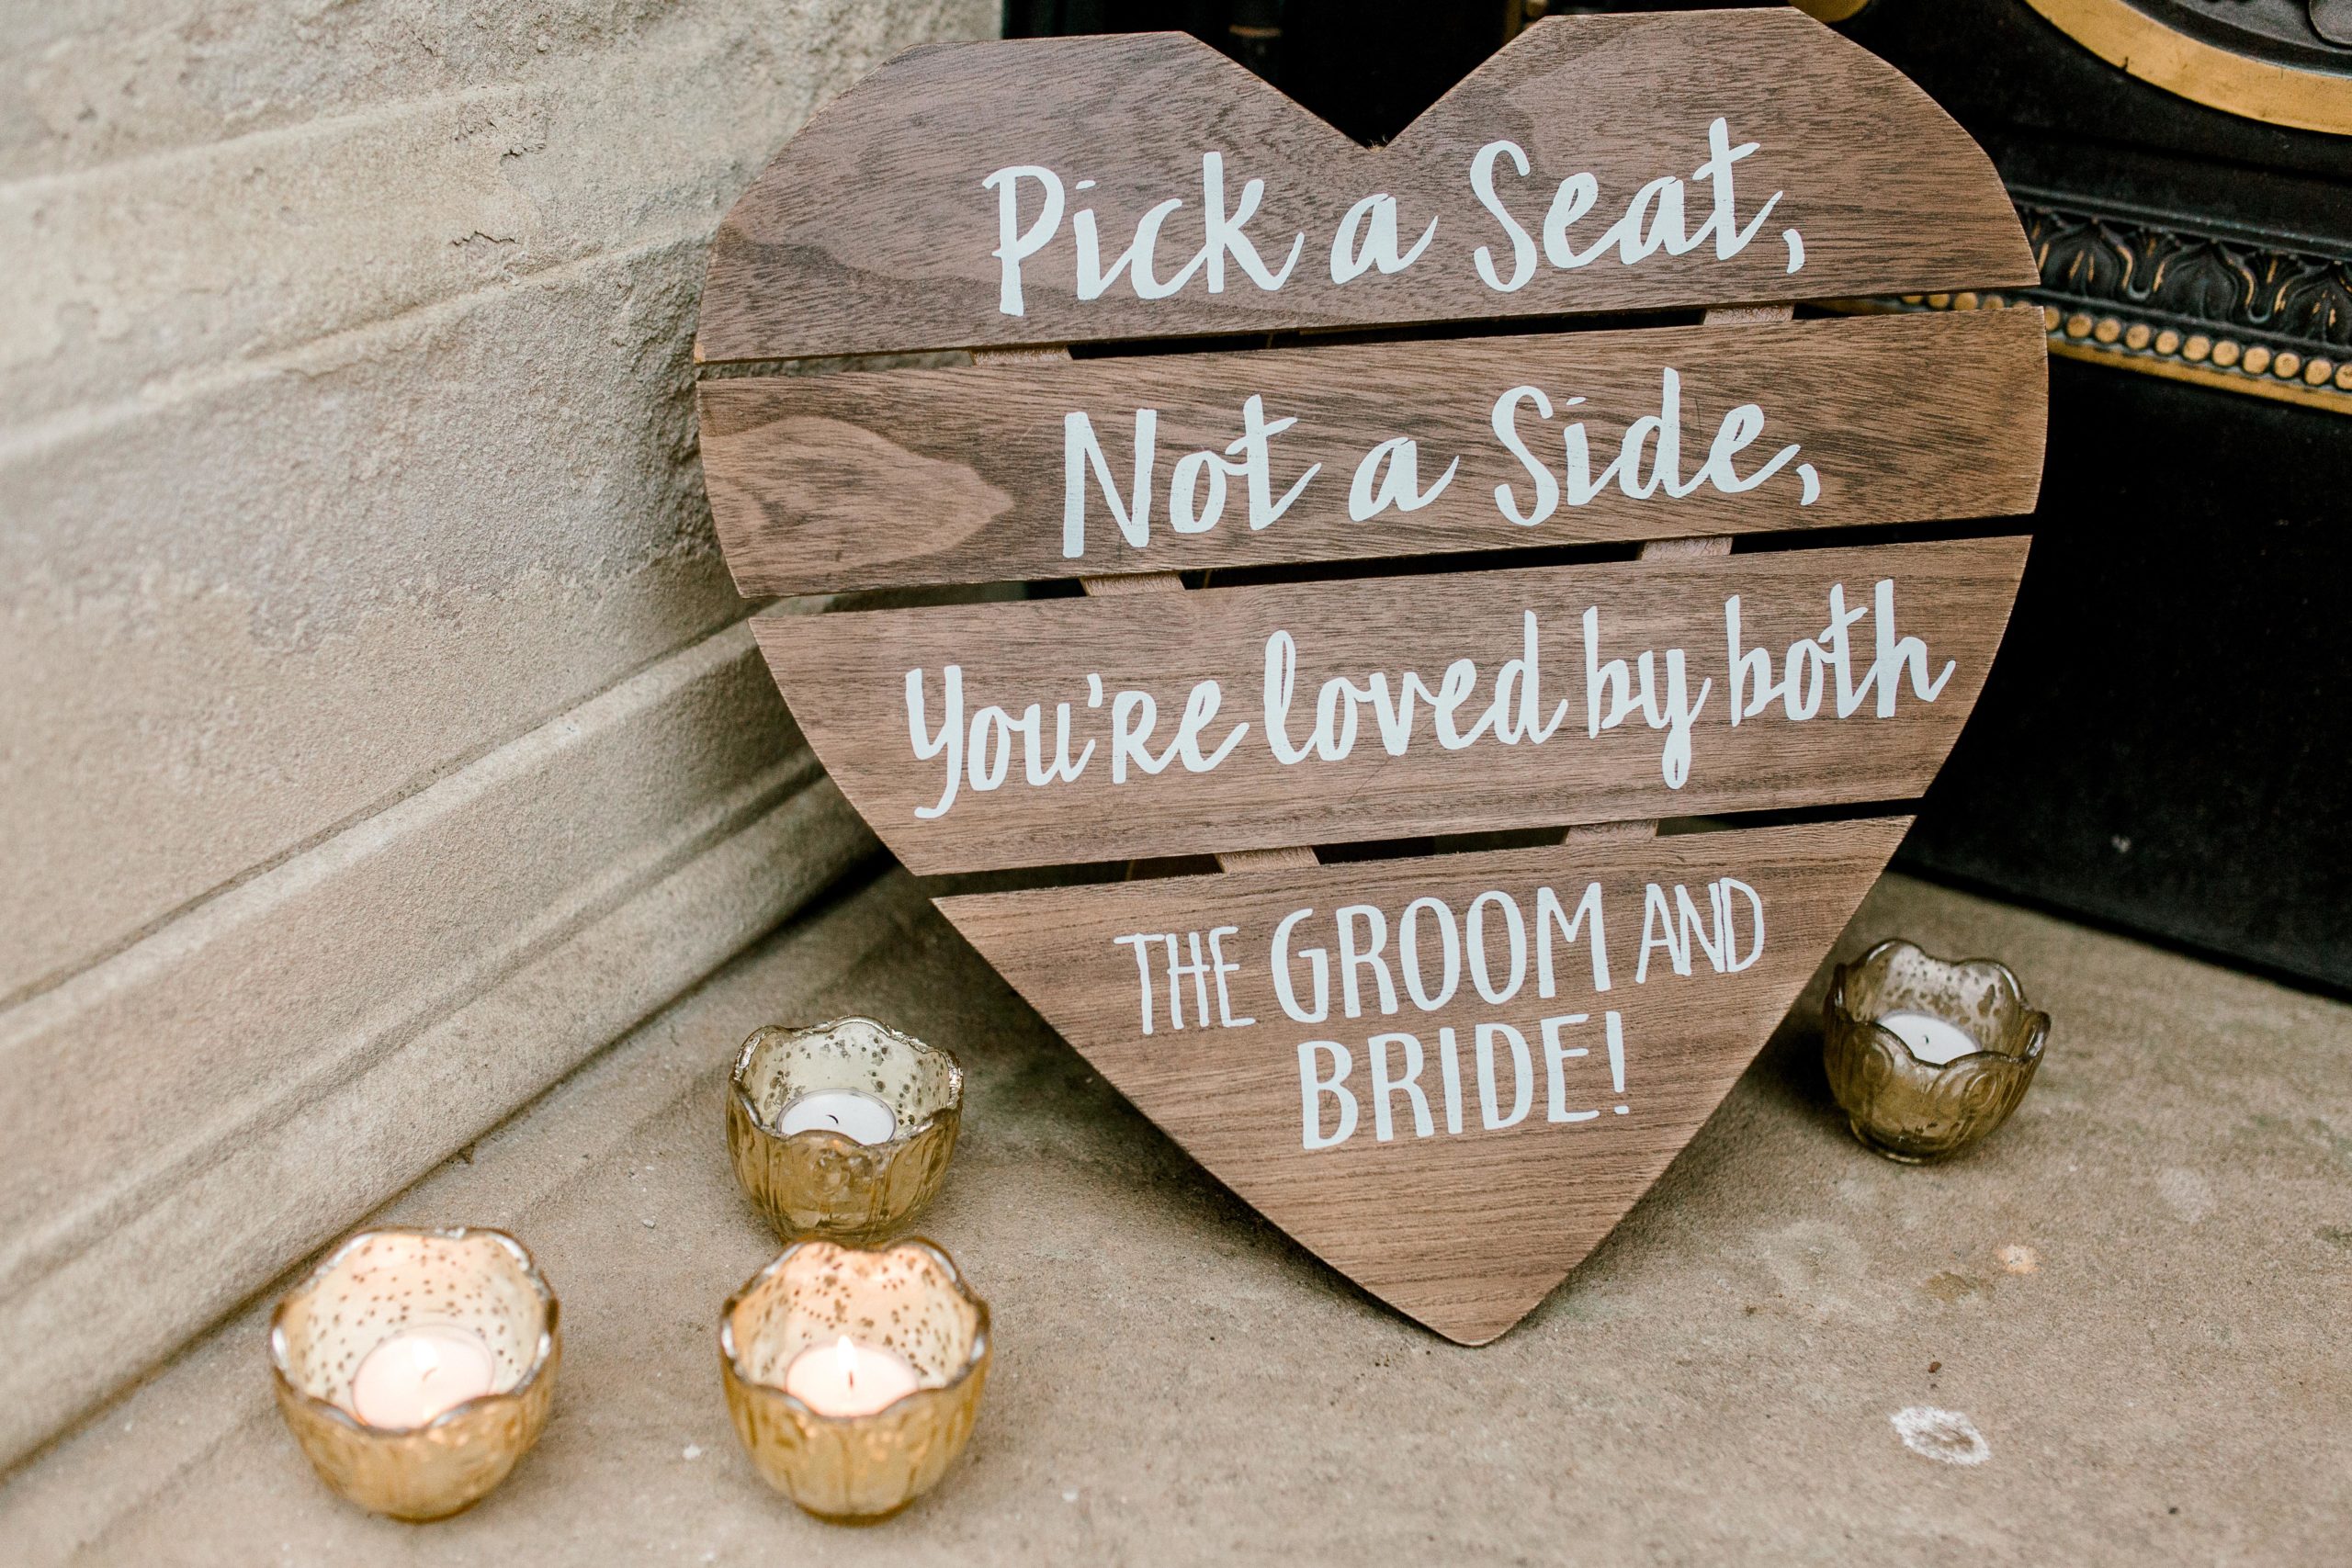 Rustic wooden sign at wedding